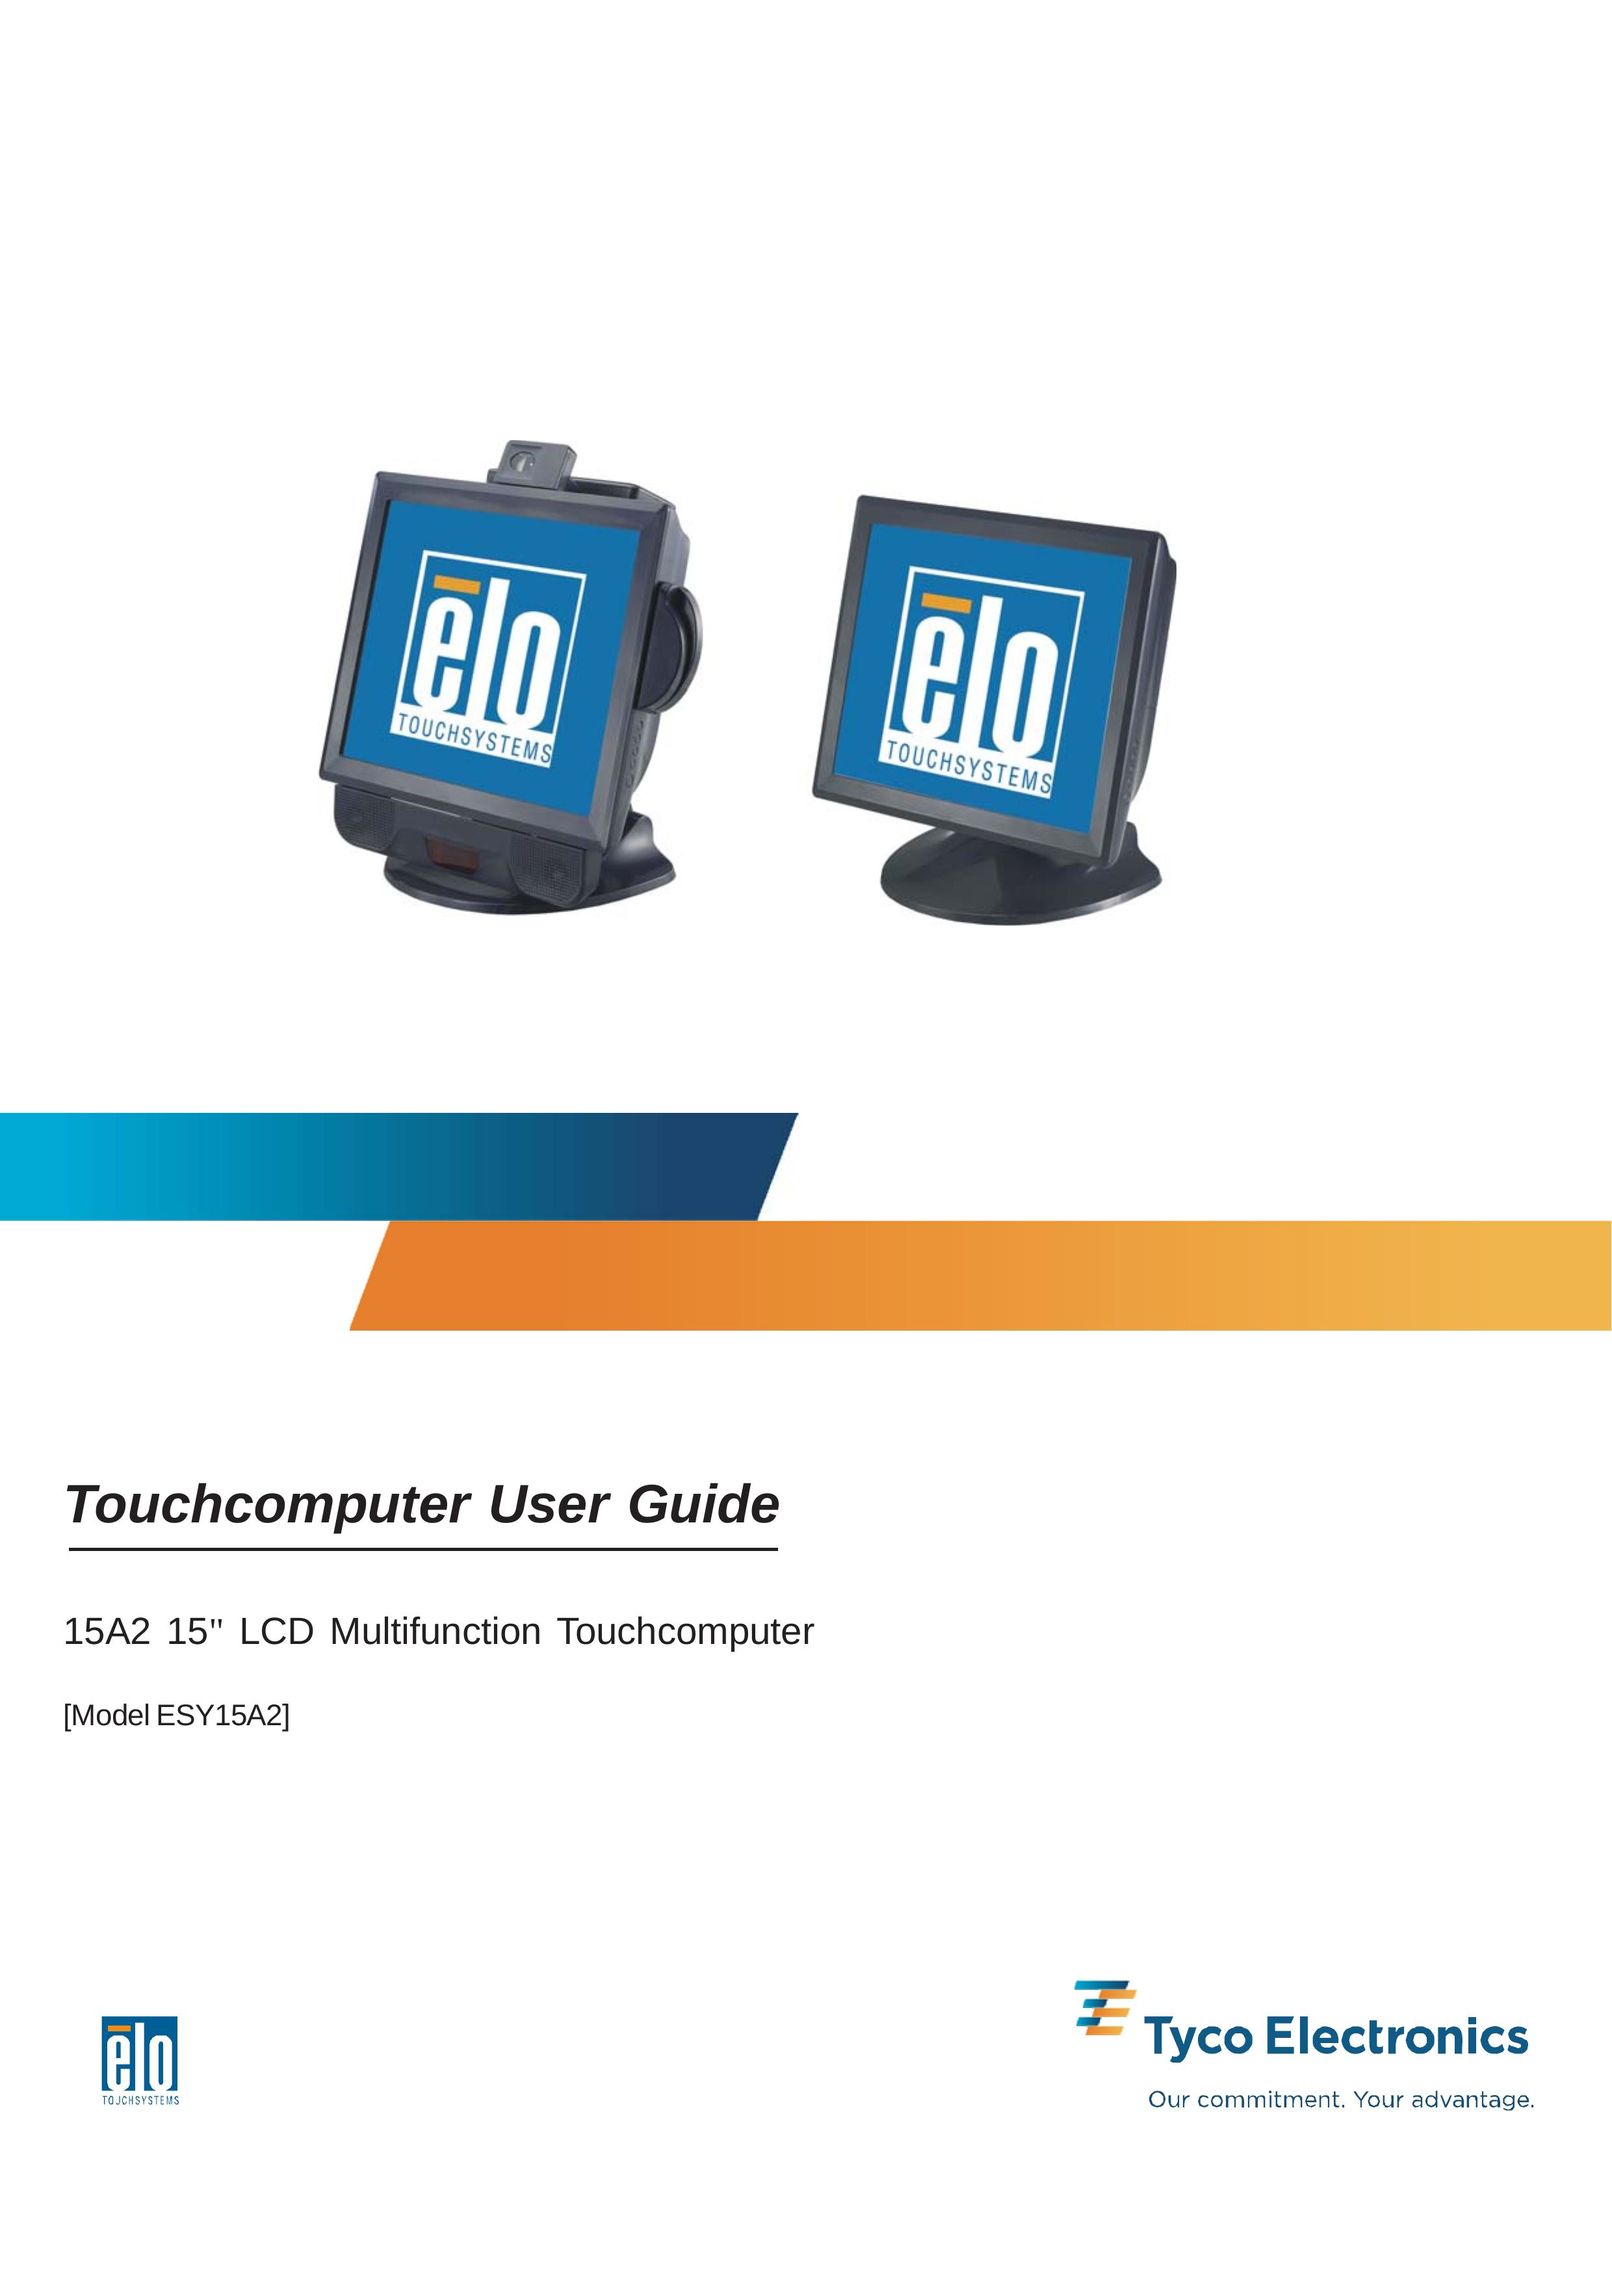 Tyco Electronics 15A2 15" LCD Multifuntion Touchcomputer Computer Hardware User Manual